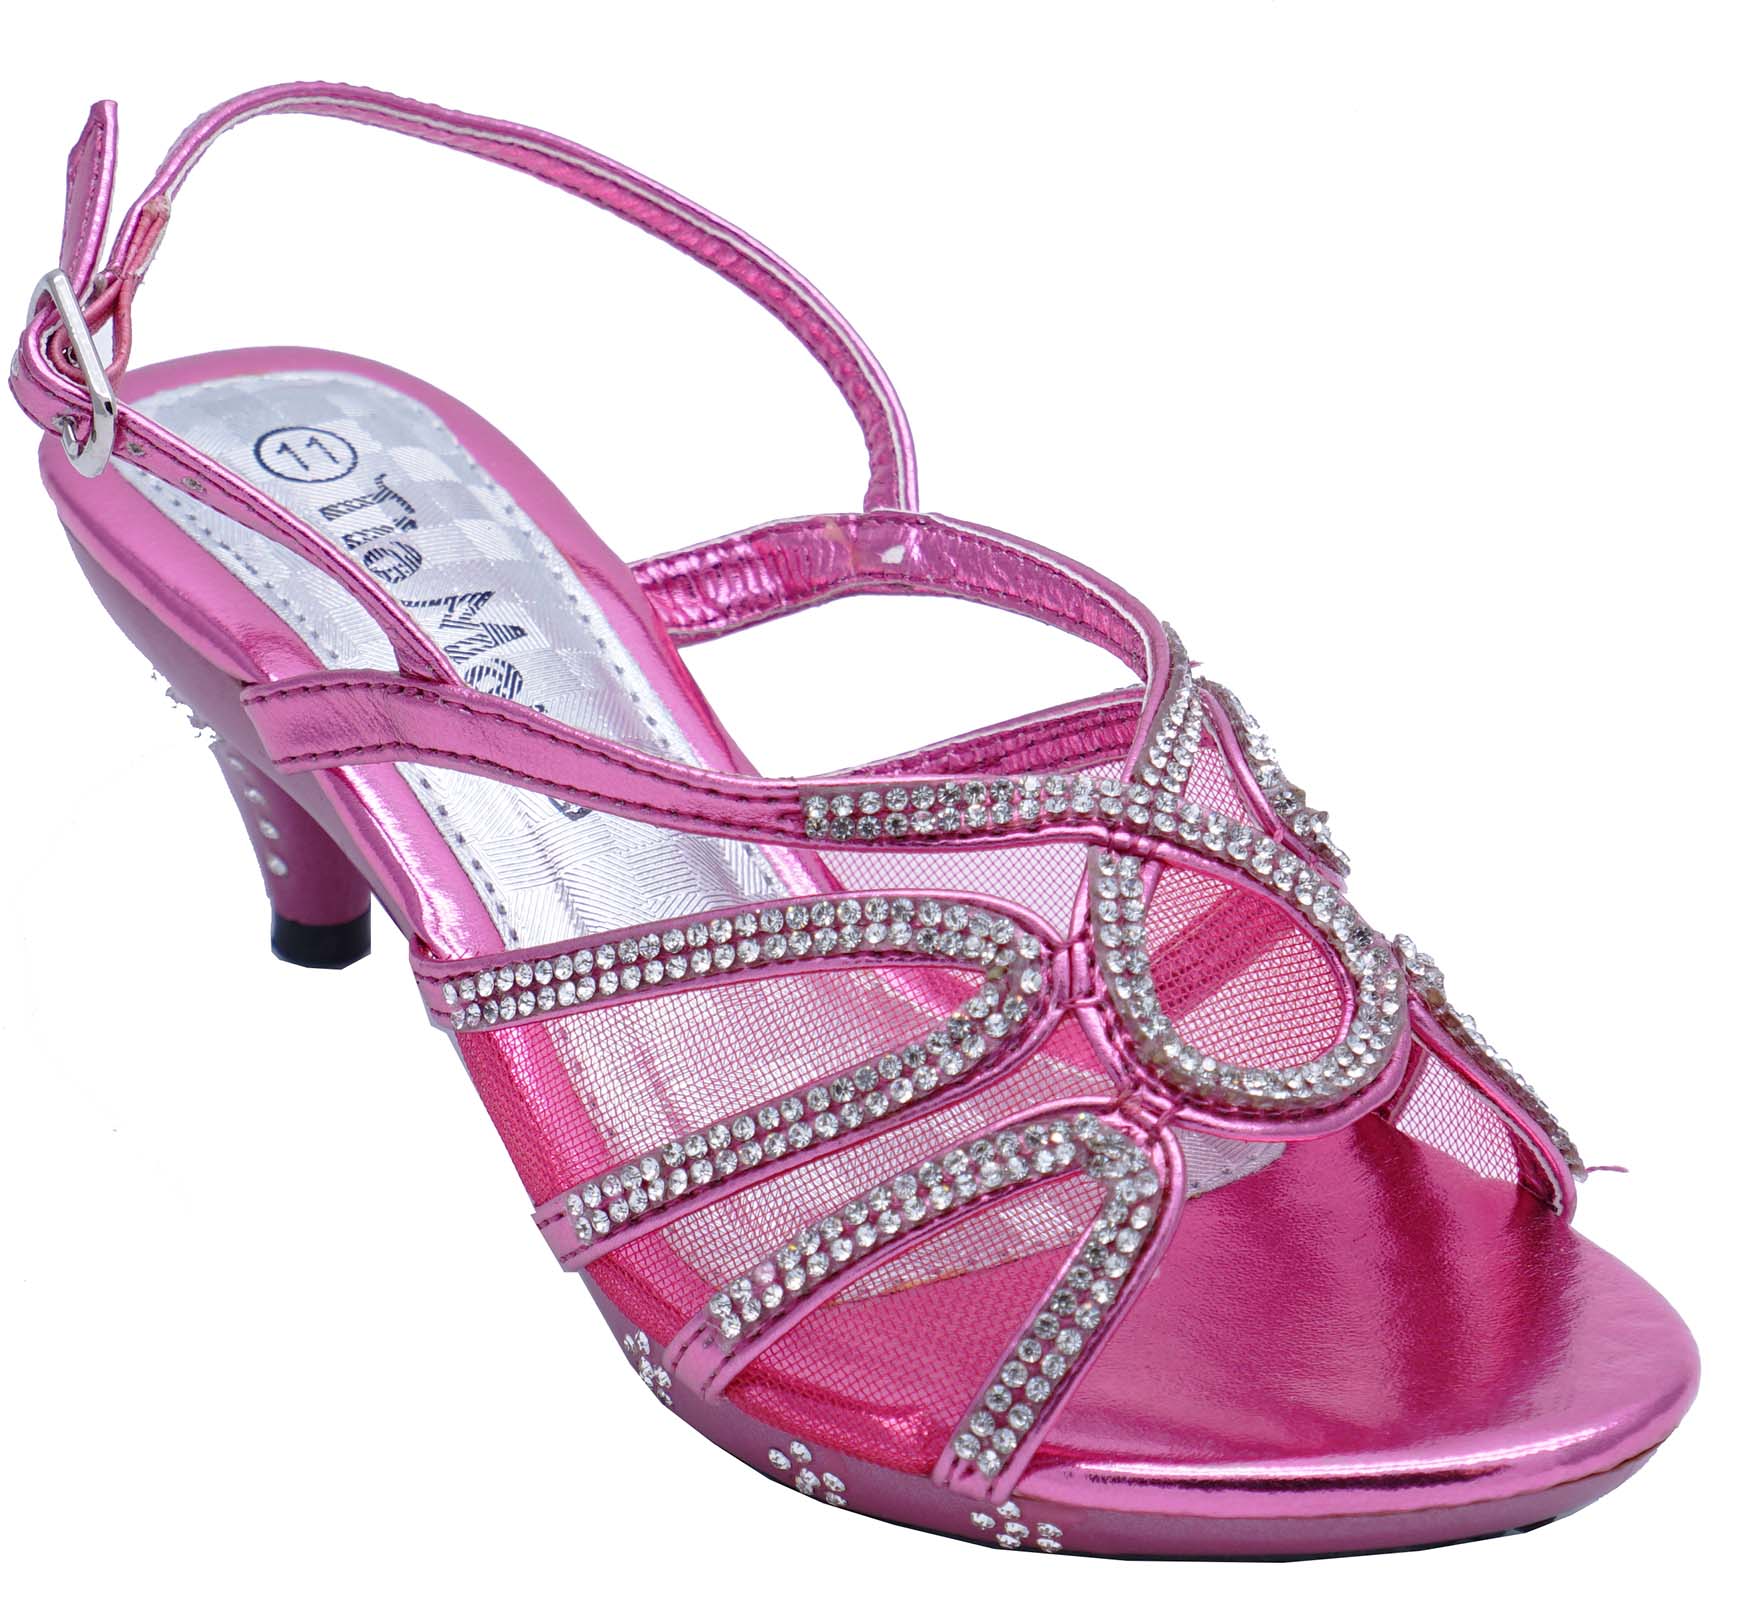 pink dress up shoes